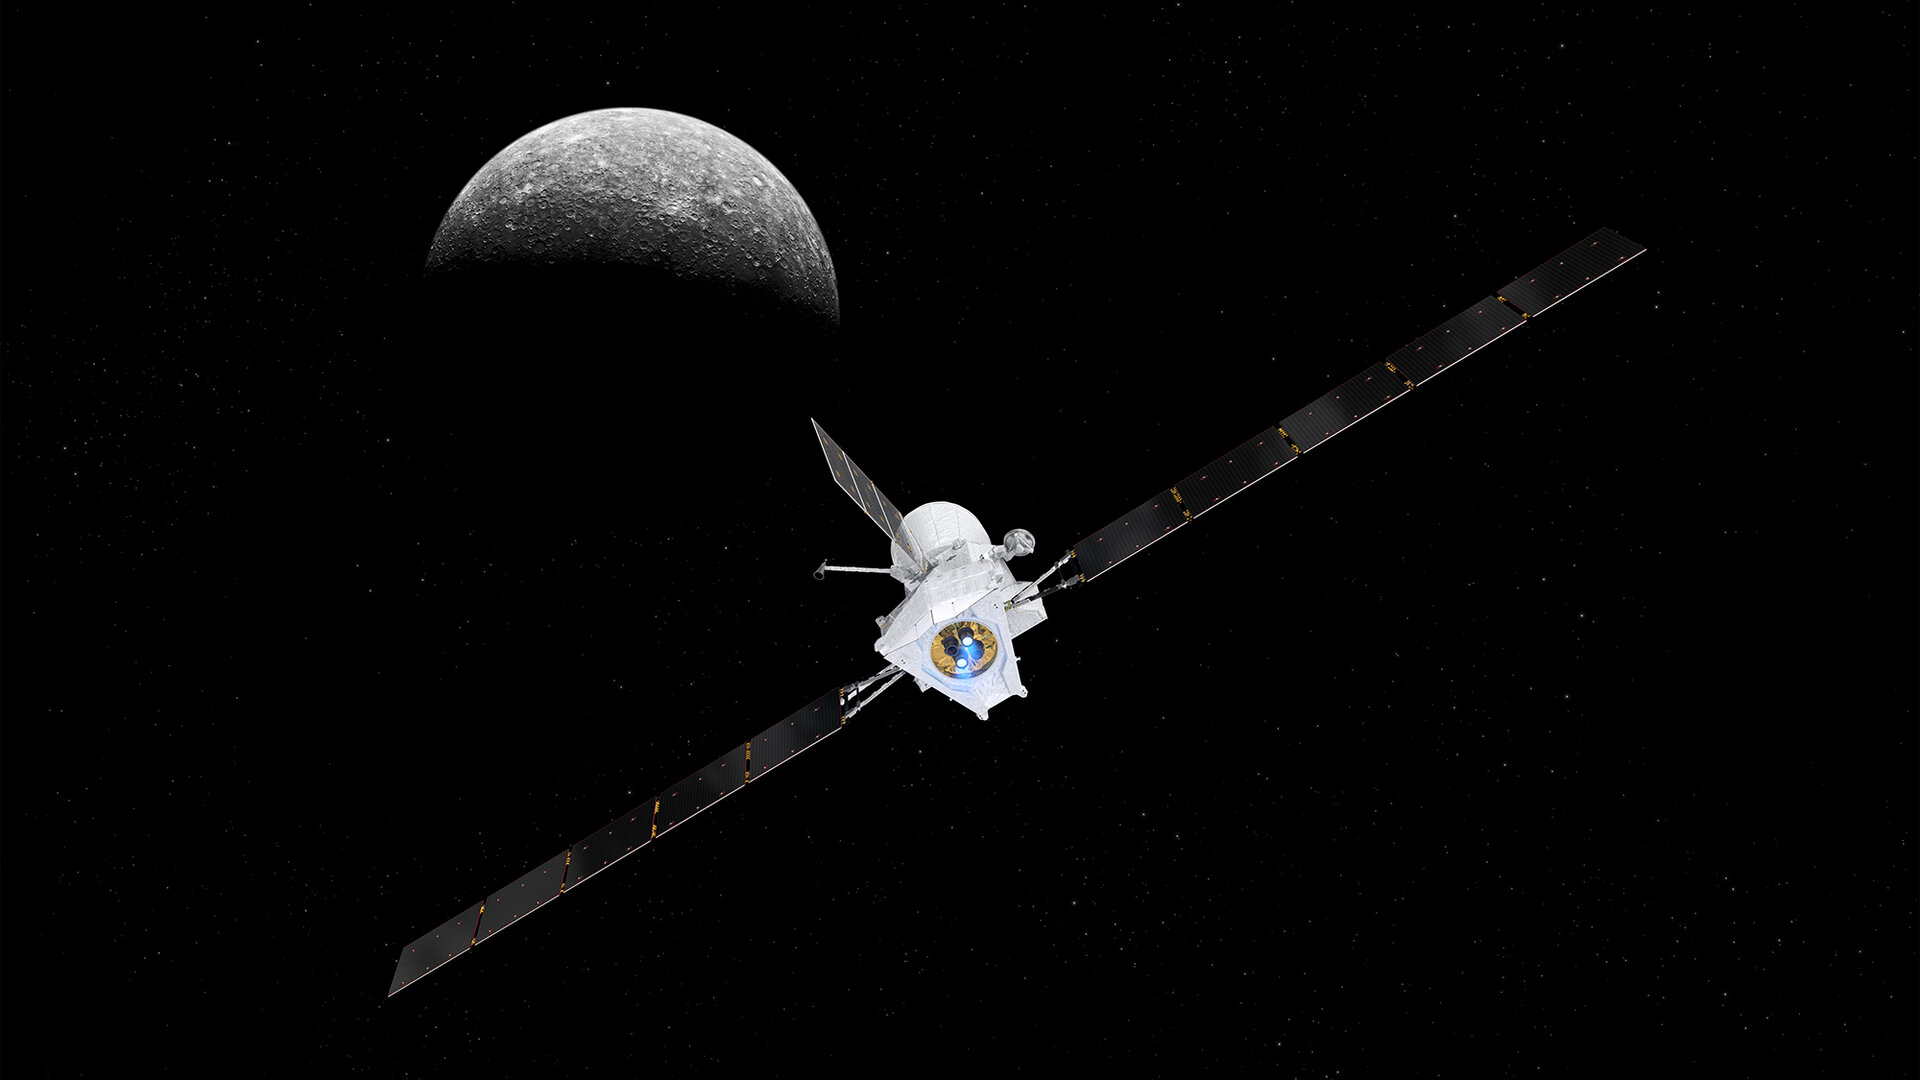 It takes seven years and nine gravity-assist manoeuvres for the BepiColombo mission to reach its destination